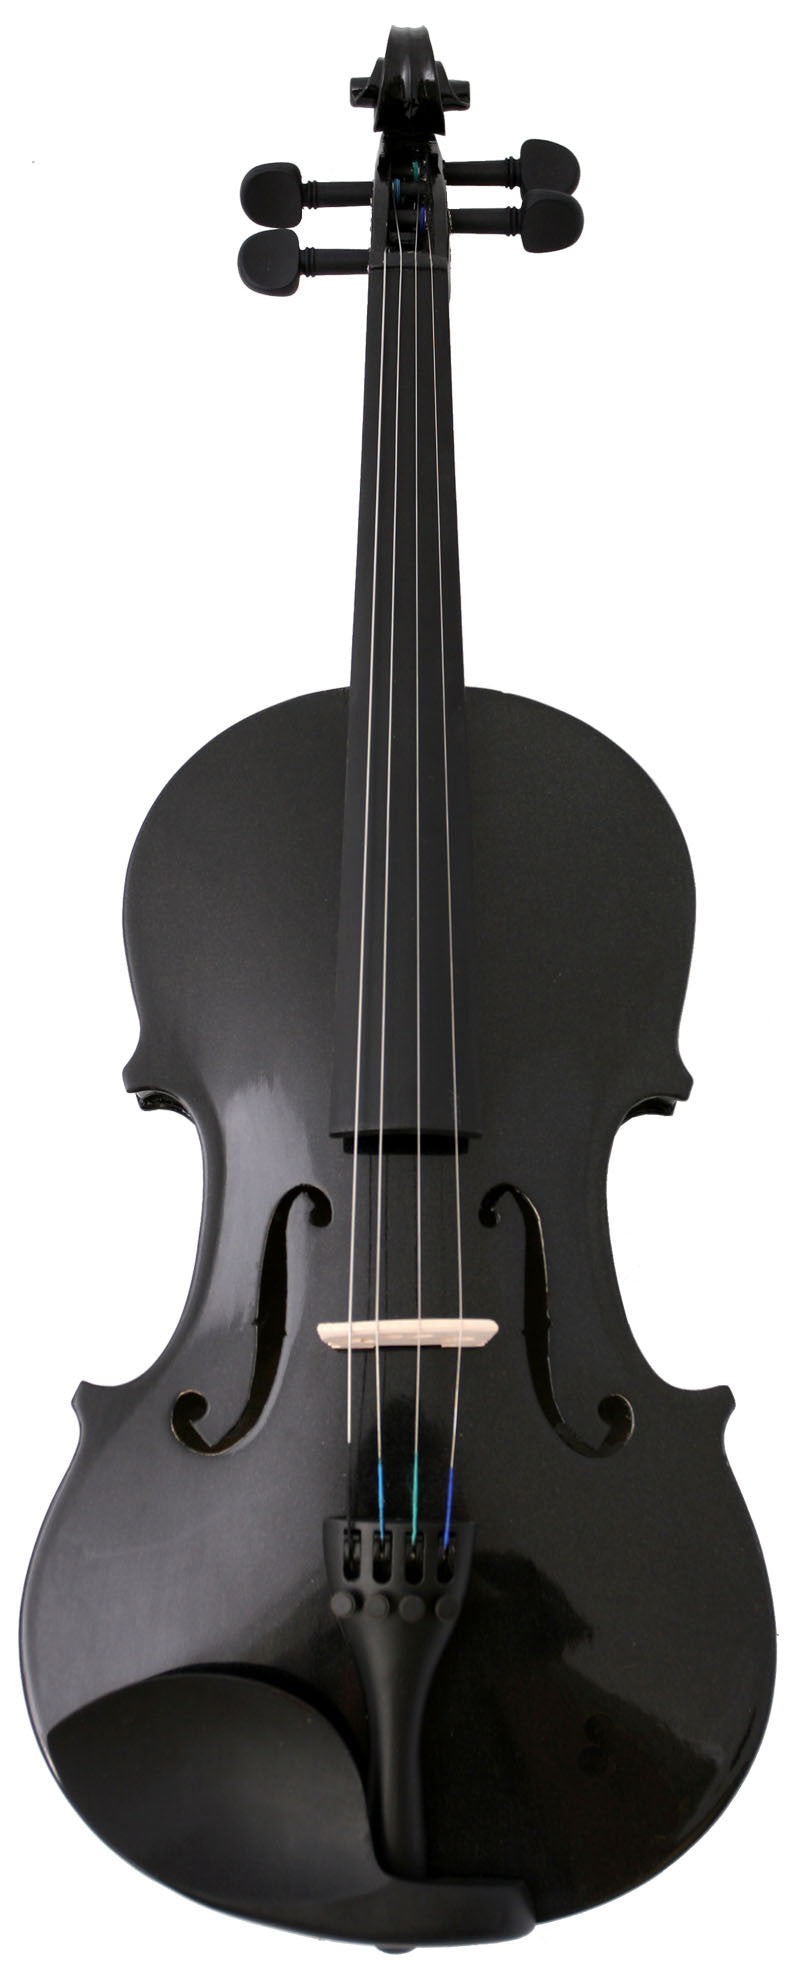 Crescent Direct Vl-bk3/4 3/4 Black Maplewood Acoustic Violin With Case, Rosin, And Bow